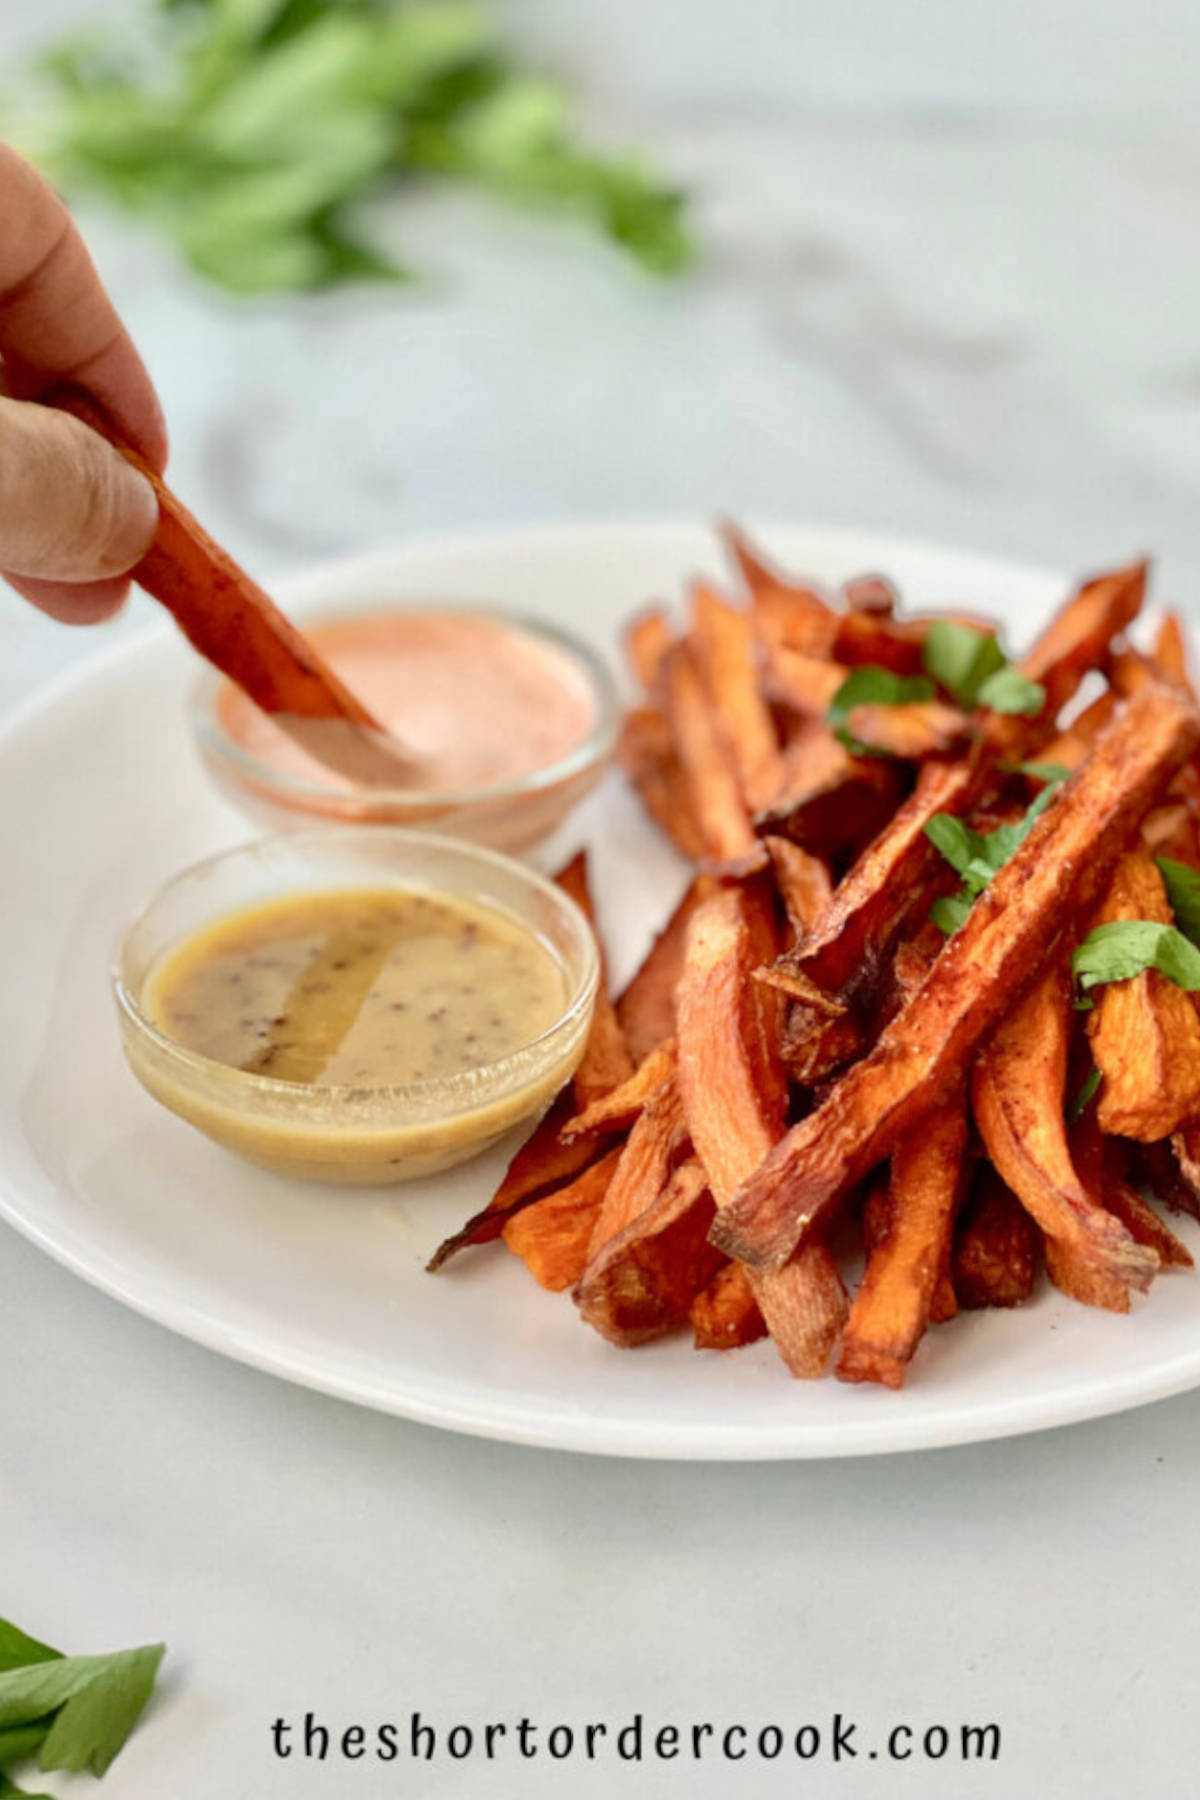 Sweet potato fries on a plate with dips.